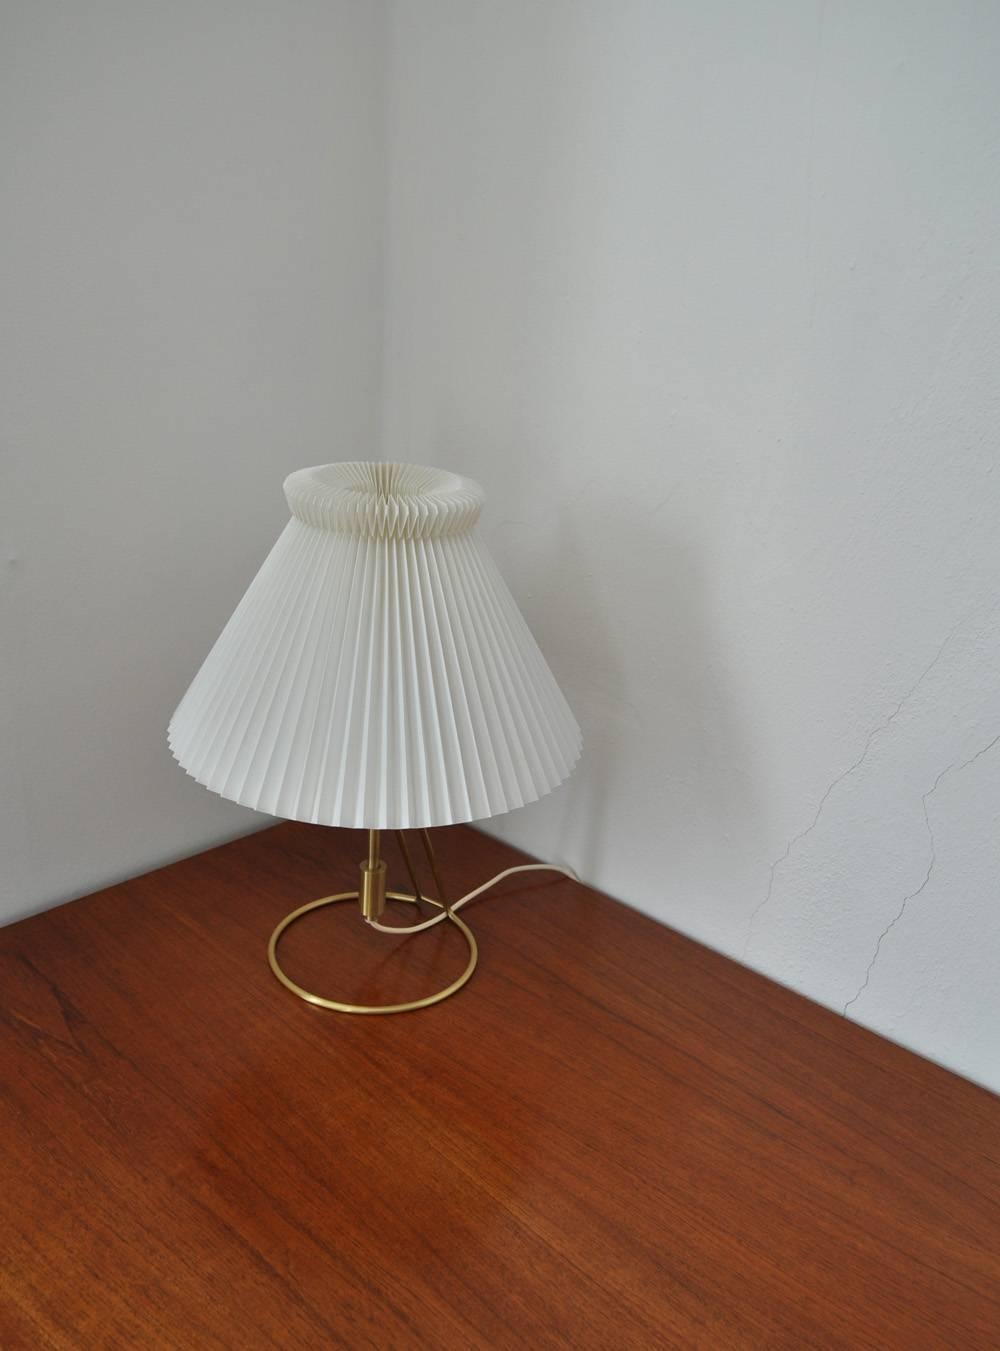 Model 305 table lamp by Christian Hvidt for Le Klint, 1970s.

Table or wall lamp made of brass with adjustable base for different lighting positions. Original Le Klint folded cellulose shade.

Measures: Shade diameter 38 cm
Base diameter 21